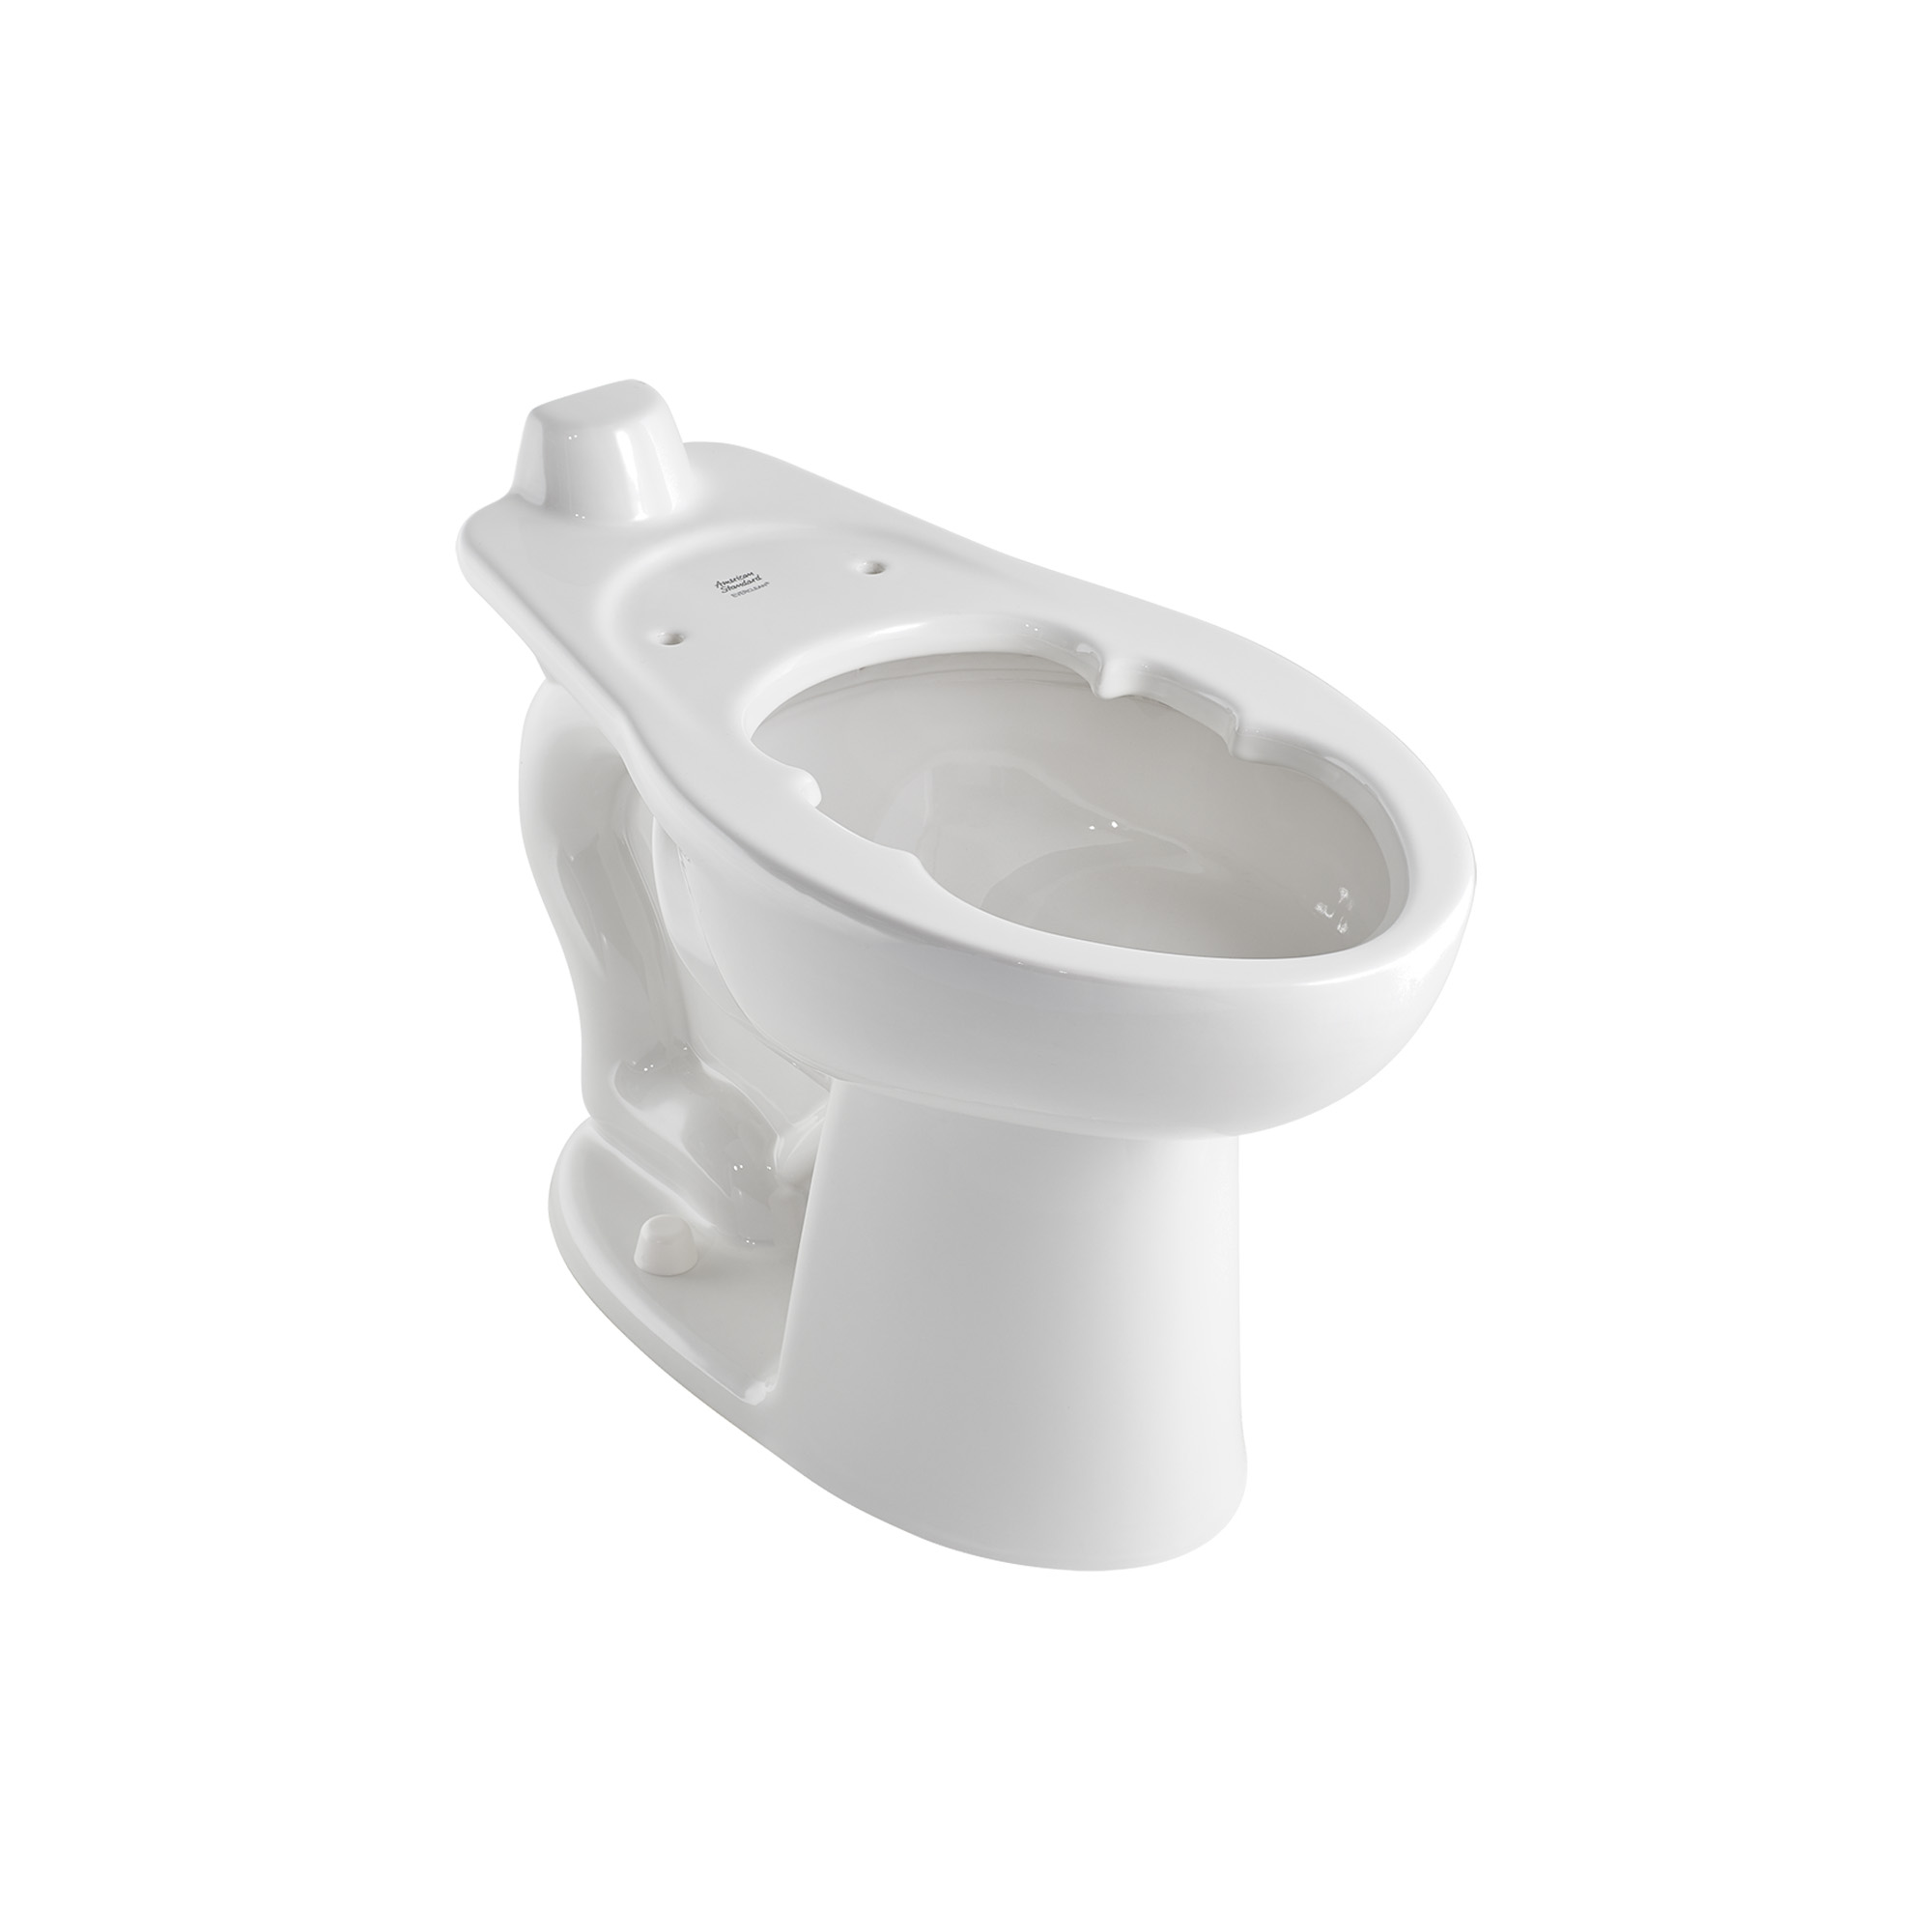 Madera™ 1.1 – 1.6 gpf (4.2 – 6.0 Lpf) Chair Height Back Spud Elongated EverClean™ Bowl With Bedpan Lugs